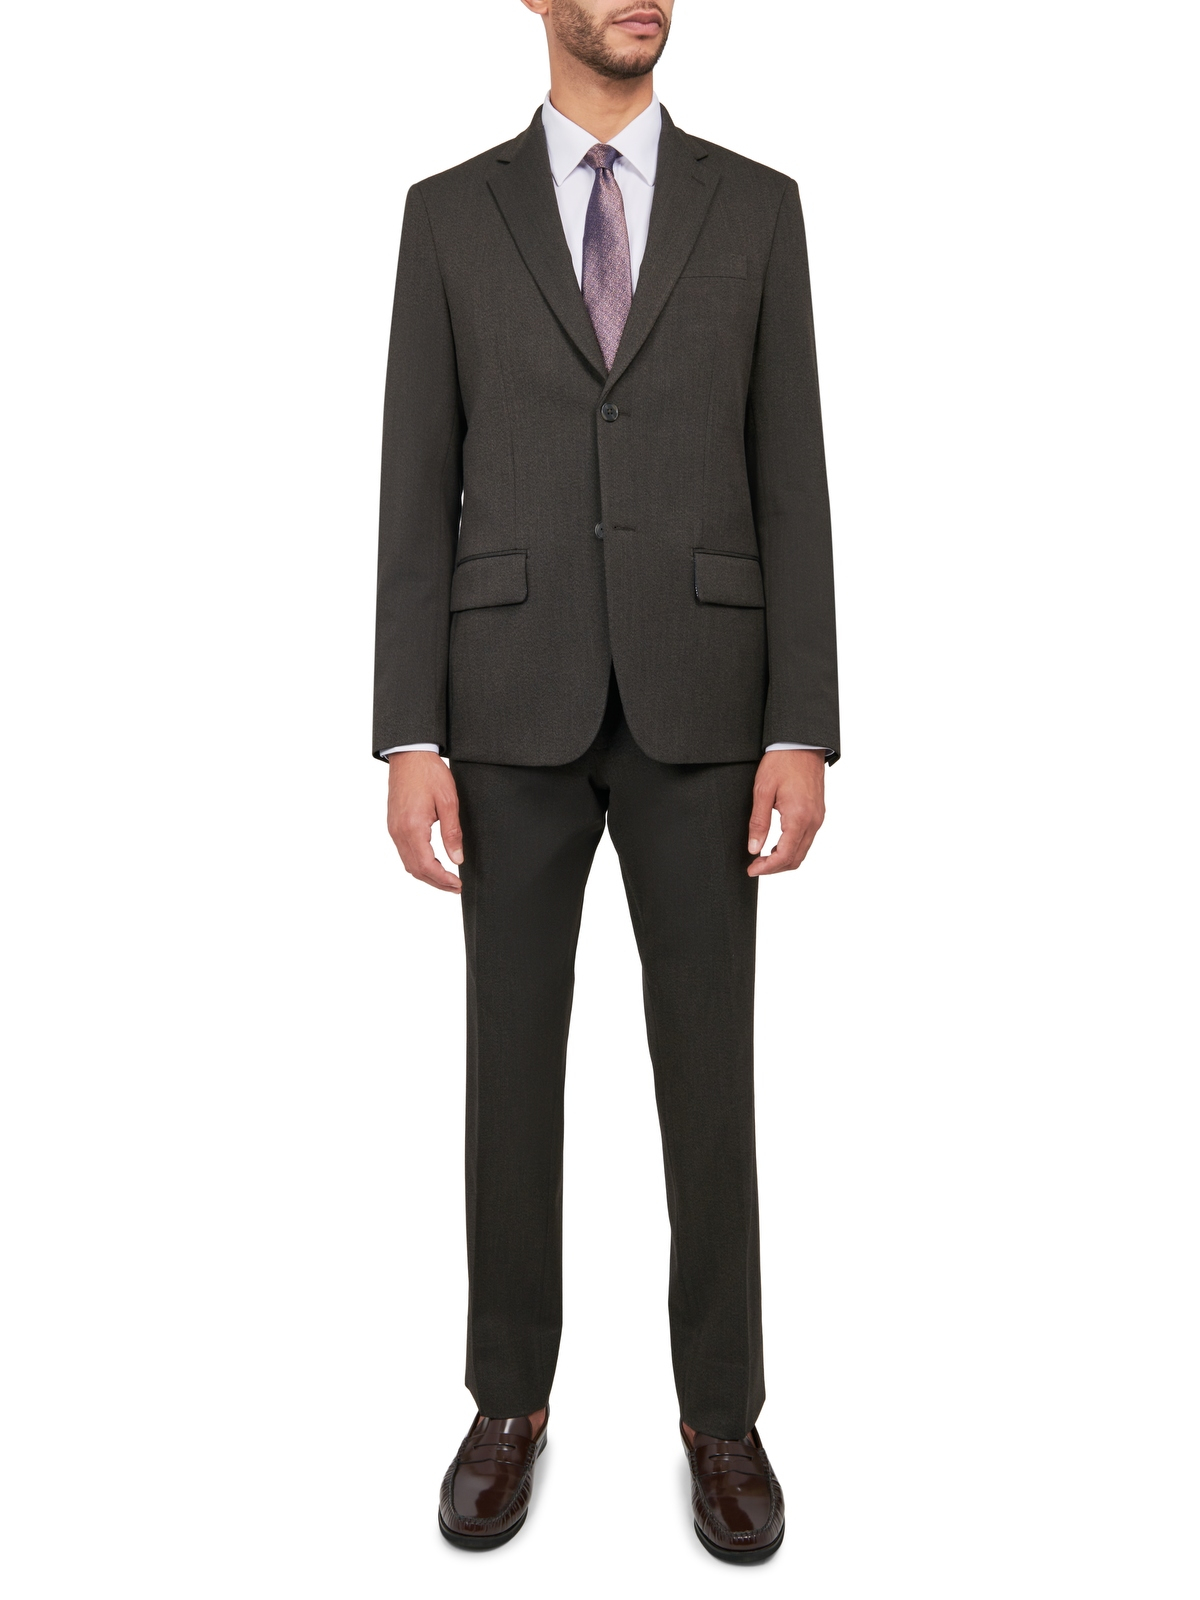 TEXTURE TAILORED SUIT